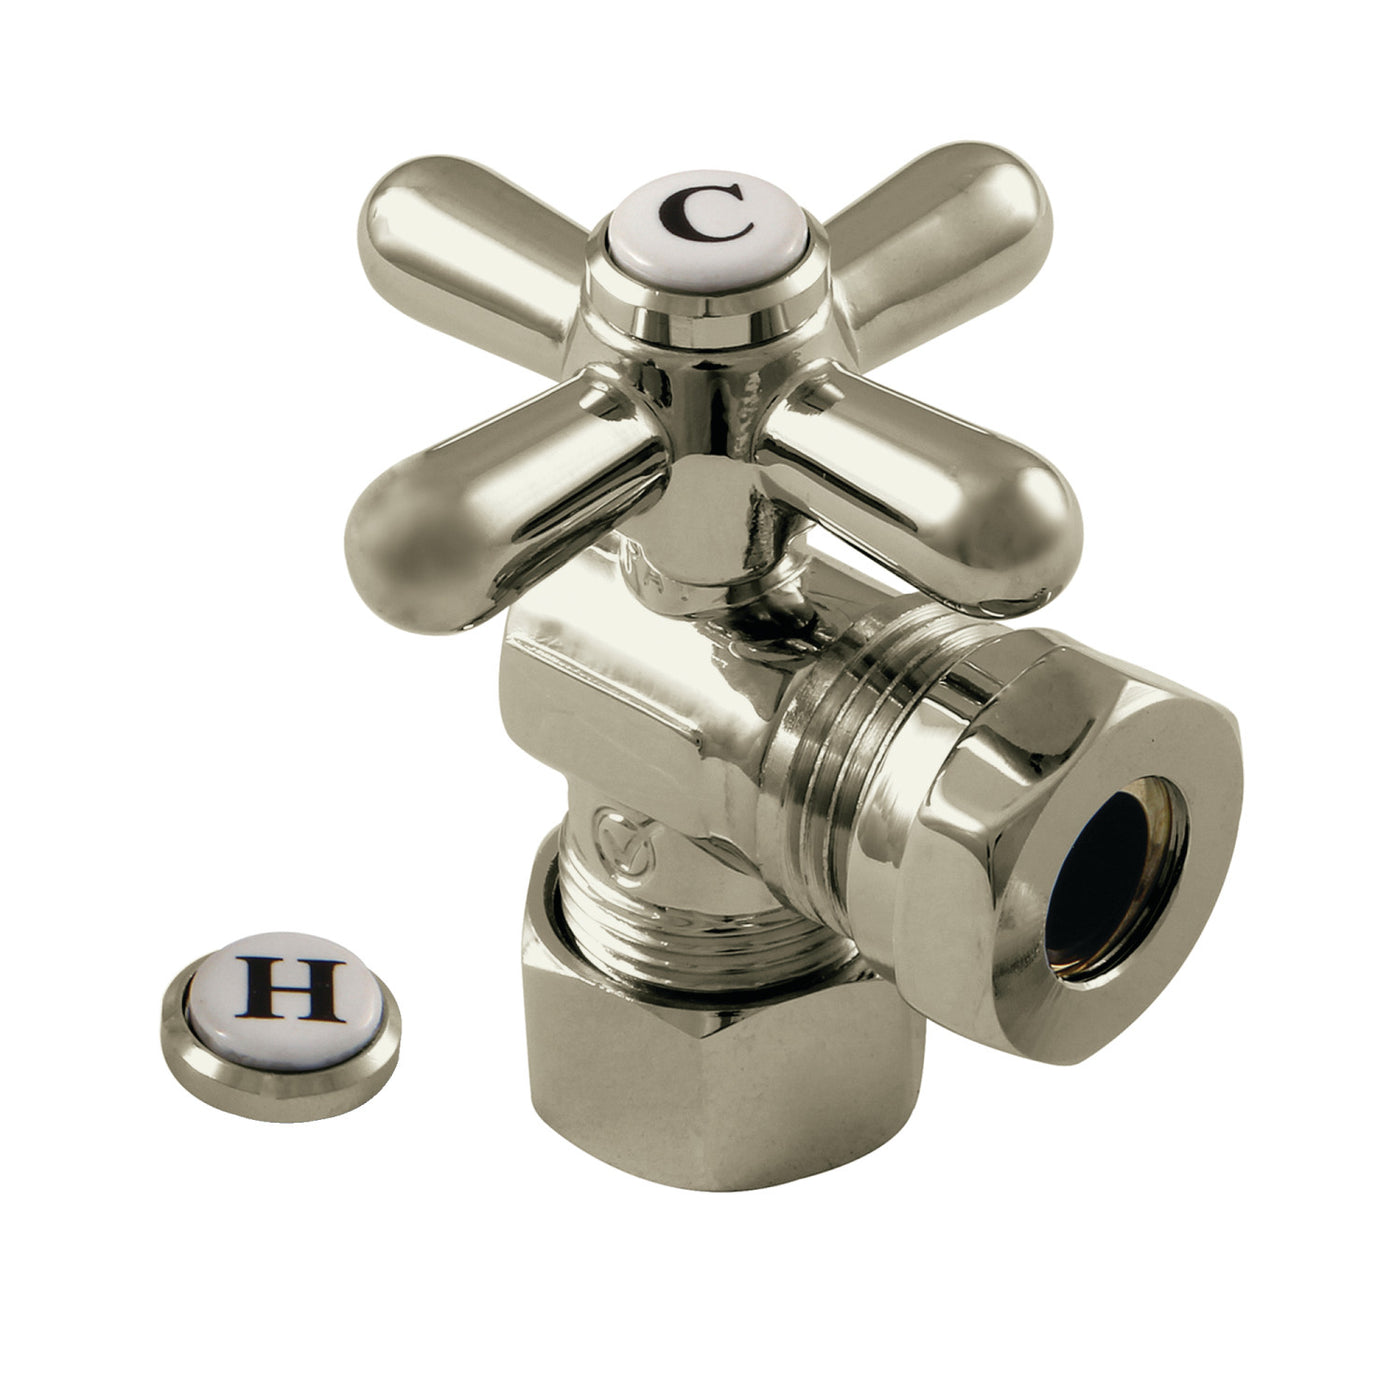 Elements of Design ECC54308X 5/8-Inch OD Comp x 1/2-Inch or 7/16-Inch Slip Joint Angle Stop Valve, Brushed Nickel